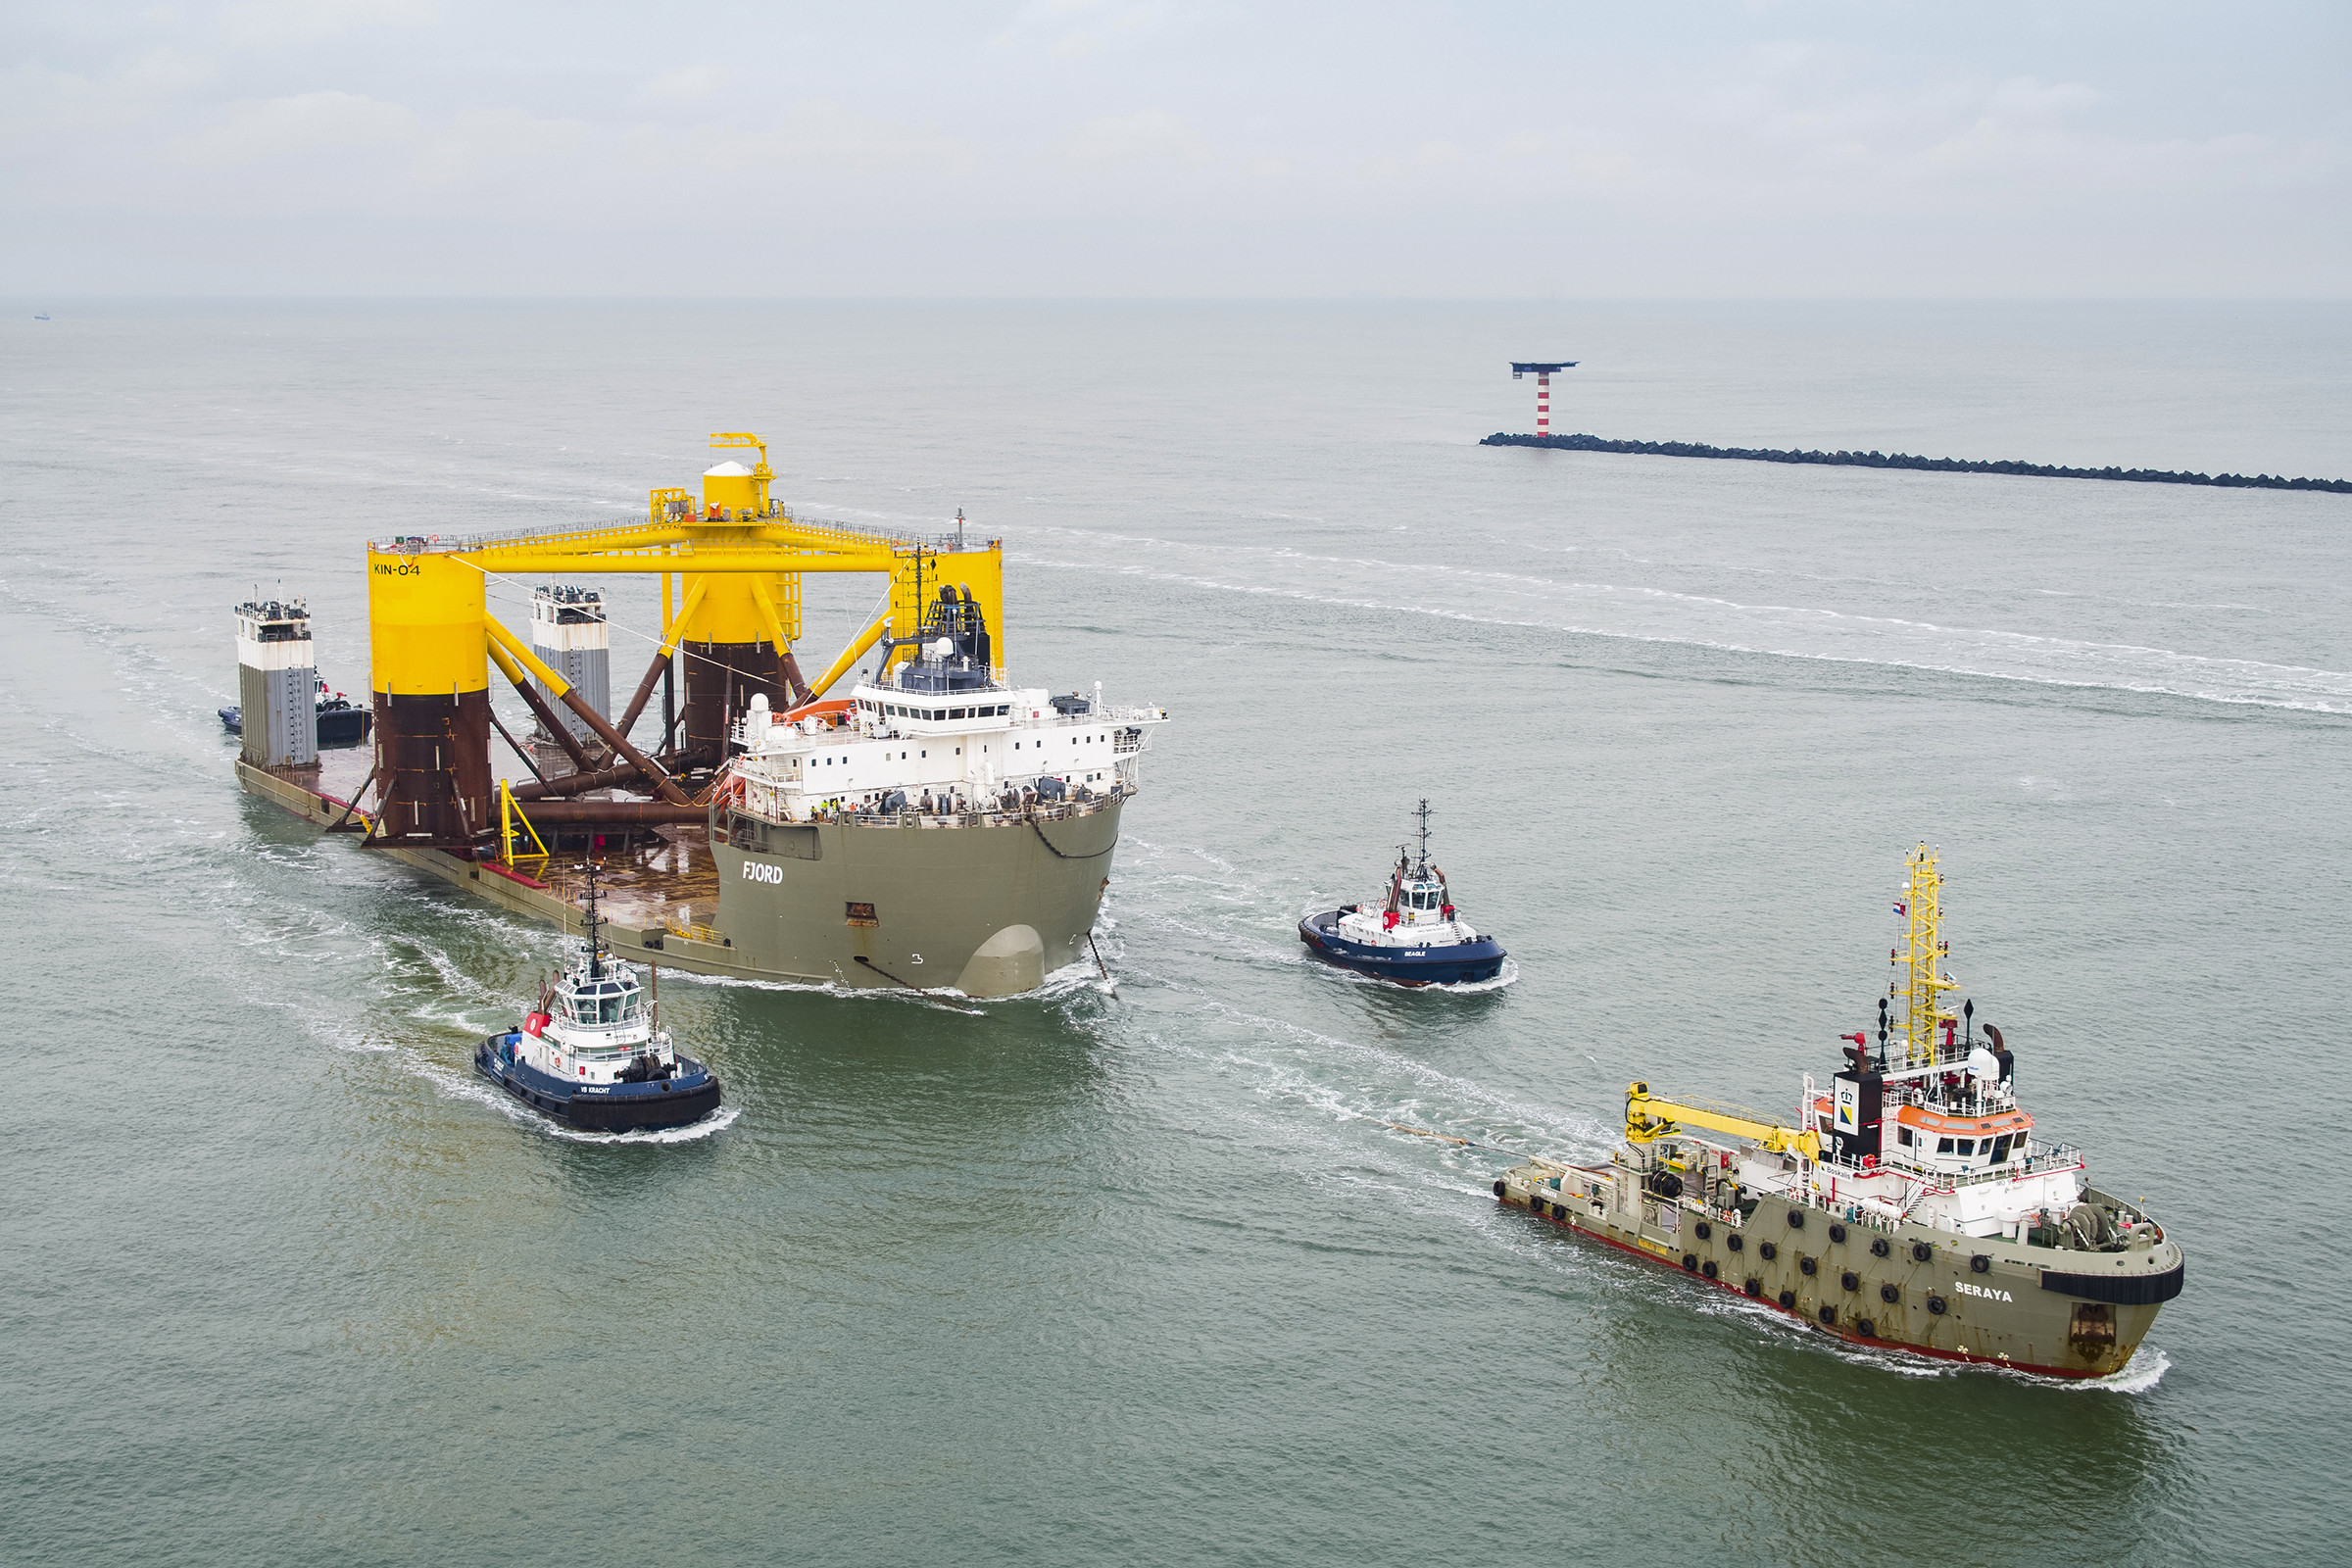 Towed by the anchor handler Seraya, Boskalis’ semi-submersible barge Fjord carrying a floater arrives in the port of Rotterdam